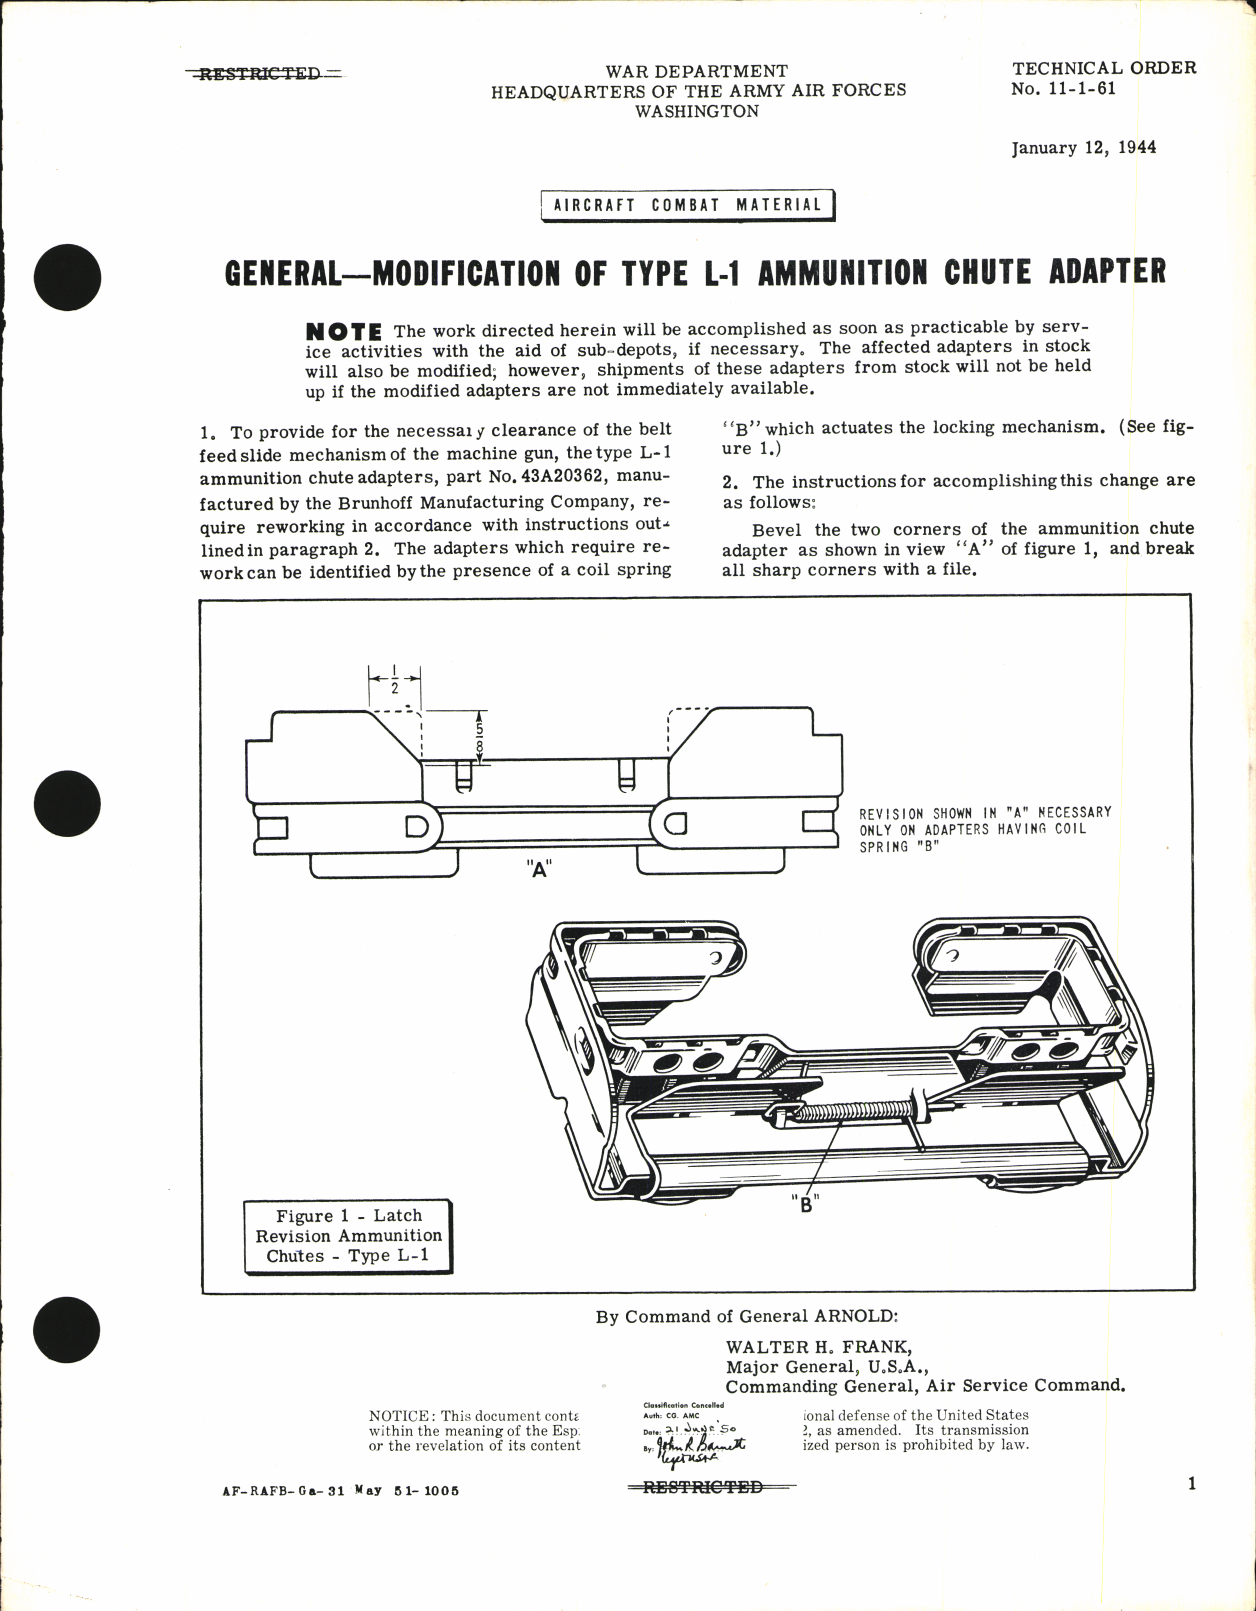 Sample page 1 from AirCorps Library document: Modification of Type L-1 Ammunition Chute Adapter